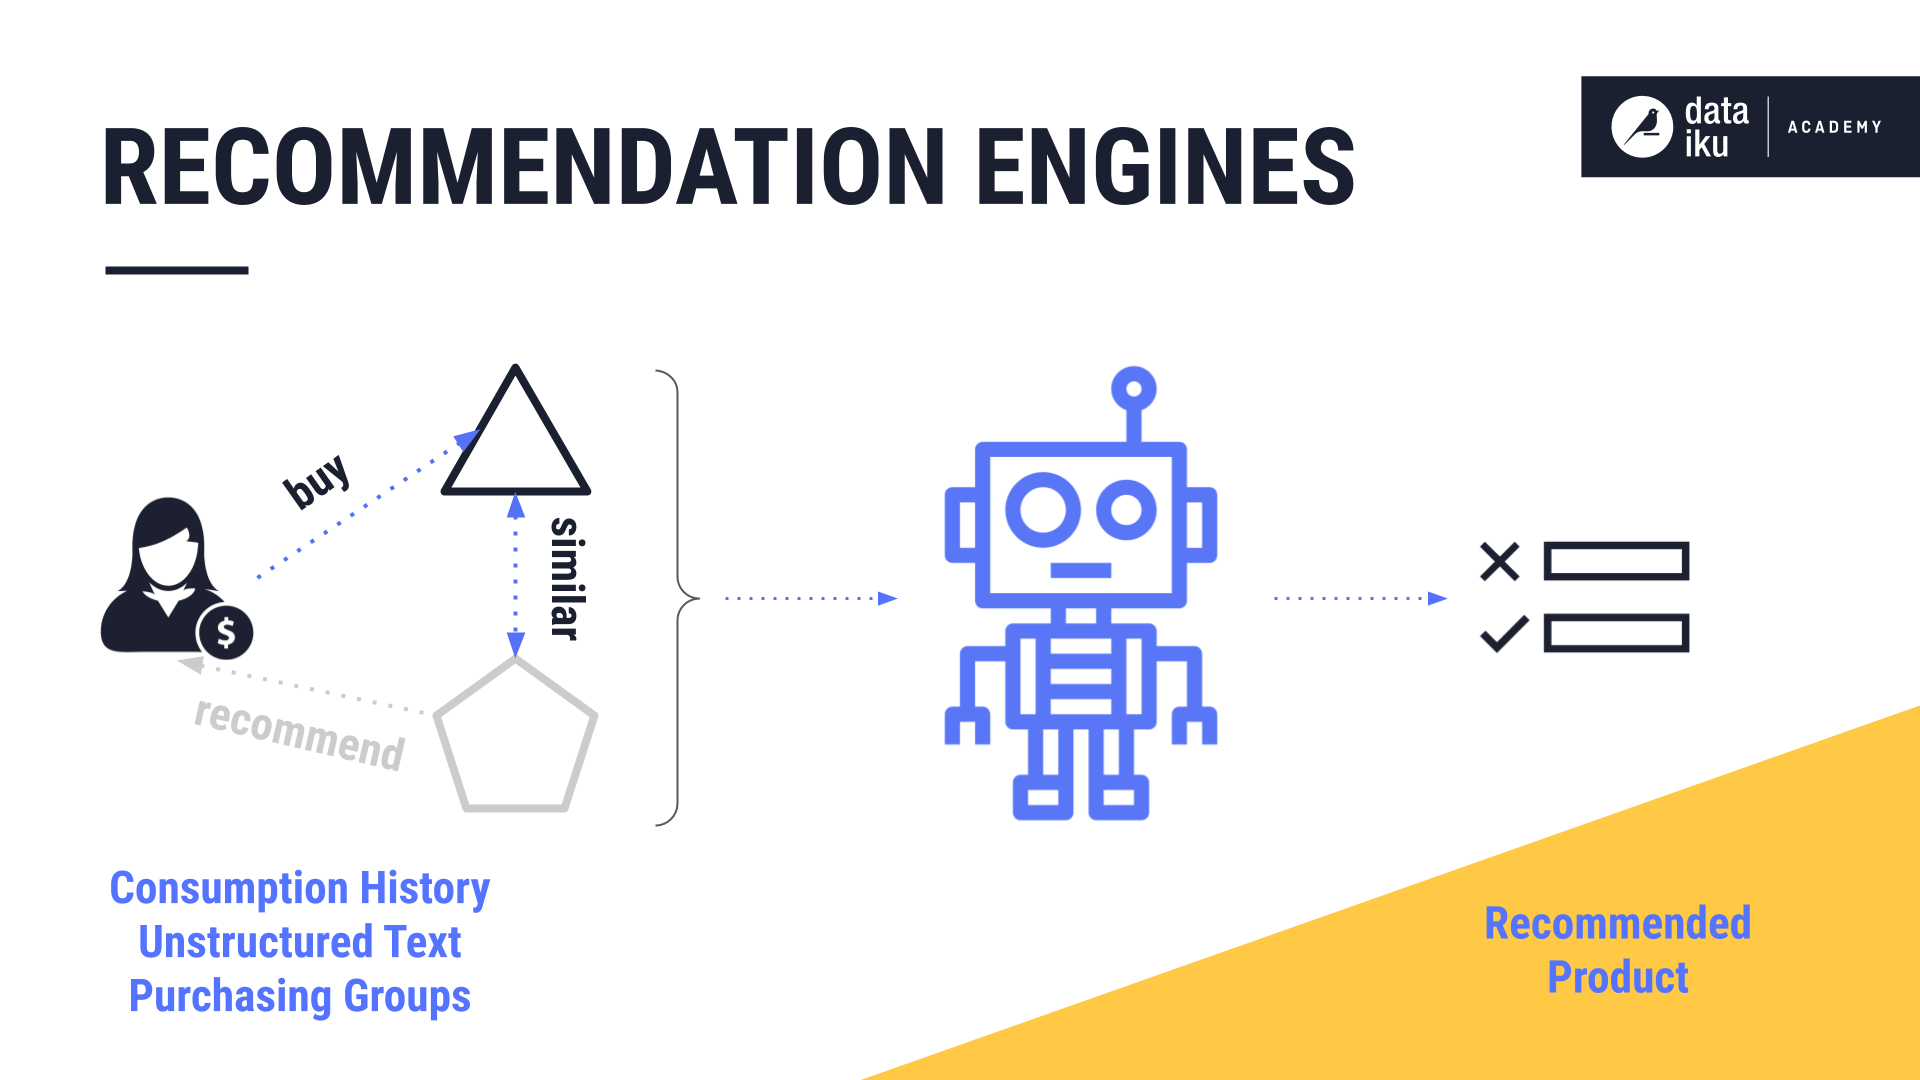 ../../_images/recommendation-engines.png